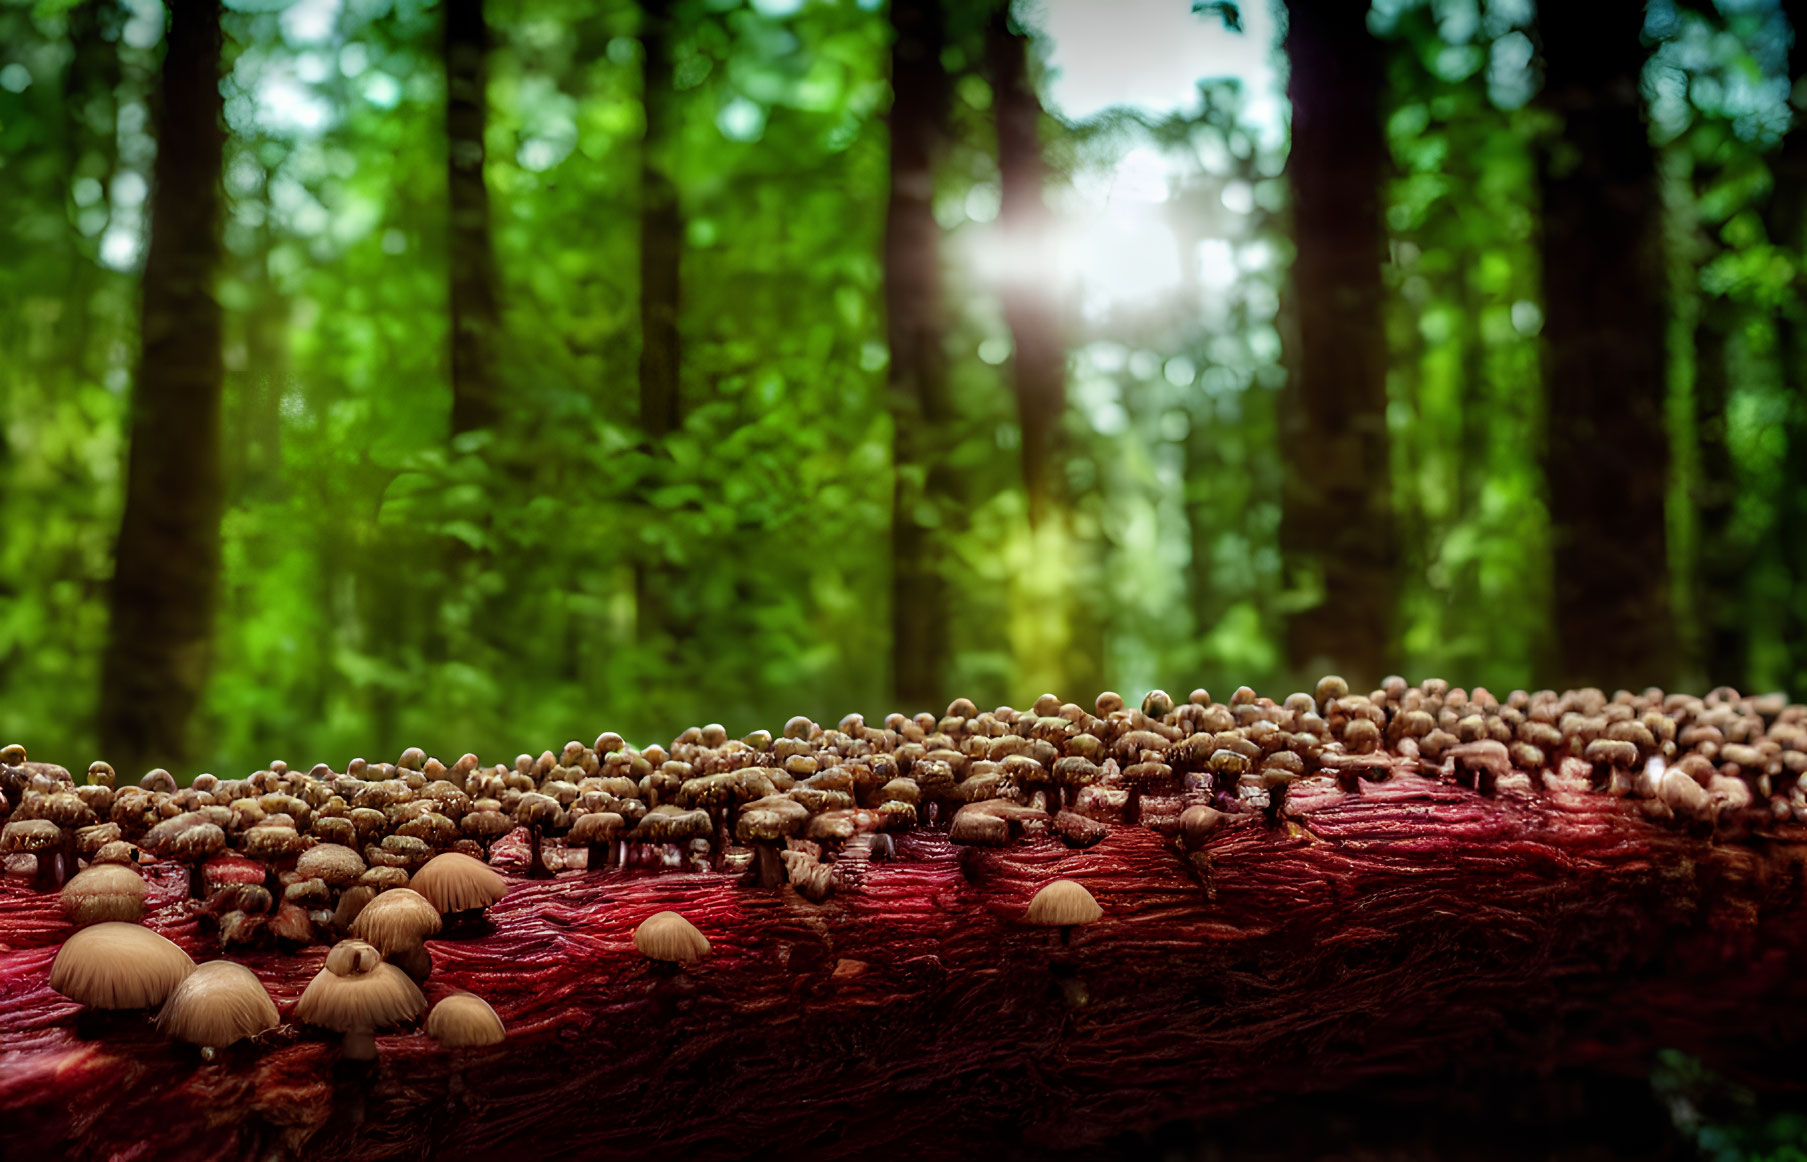 Lush Forest Scene with Sunlight and Mushrooms